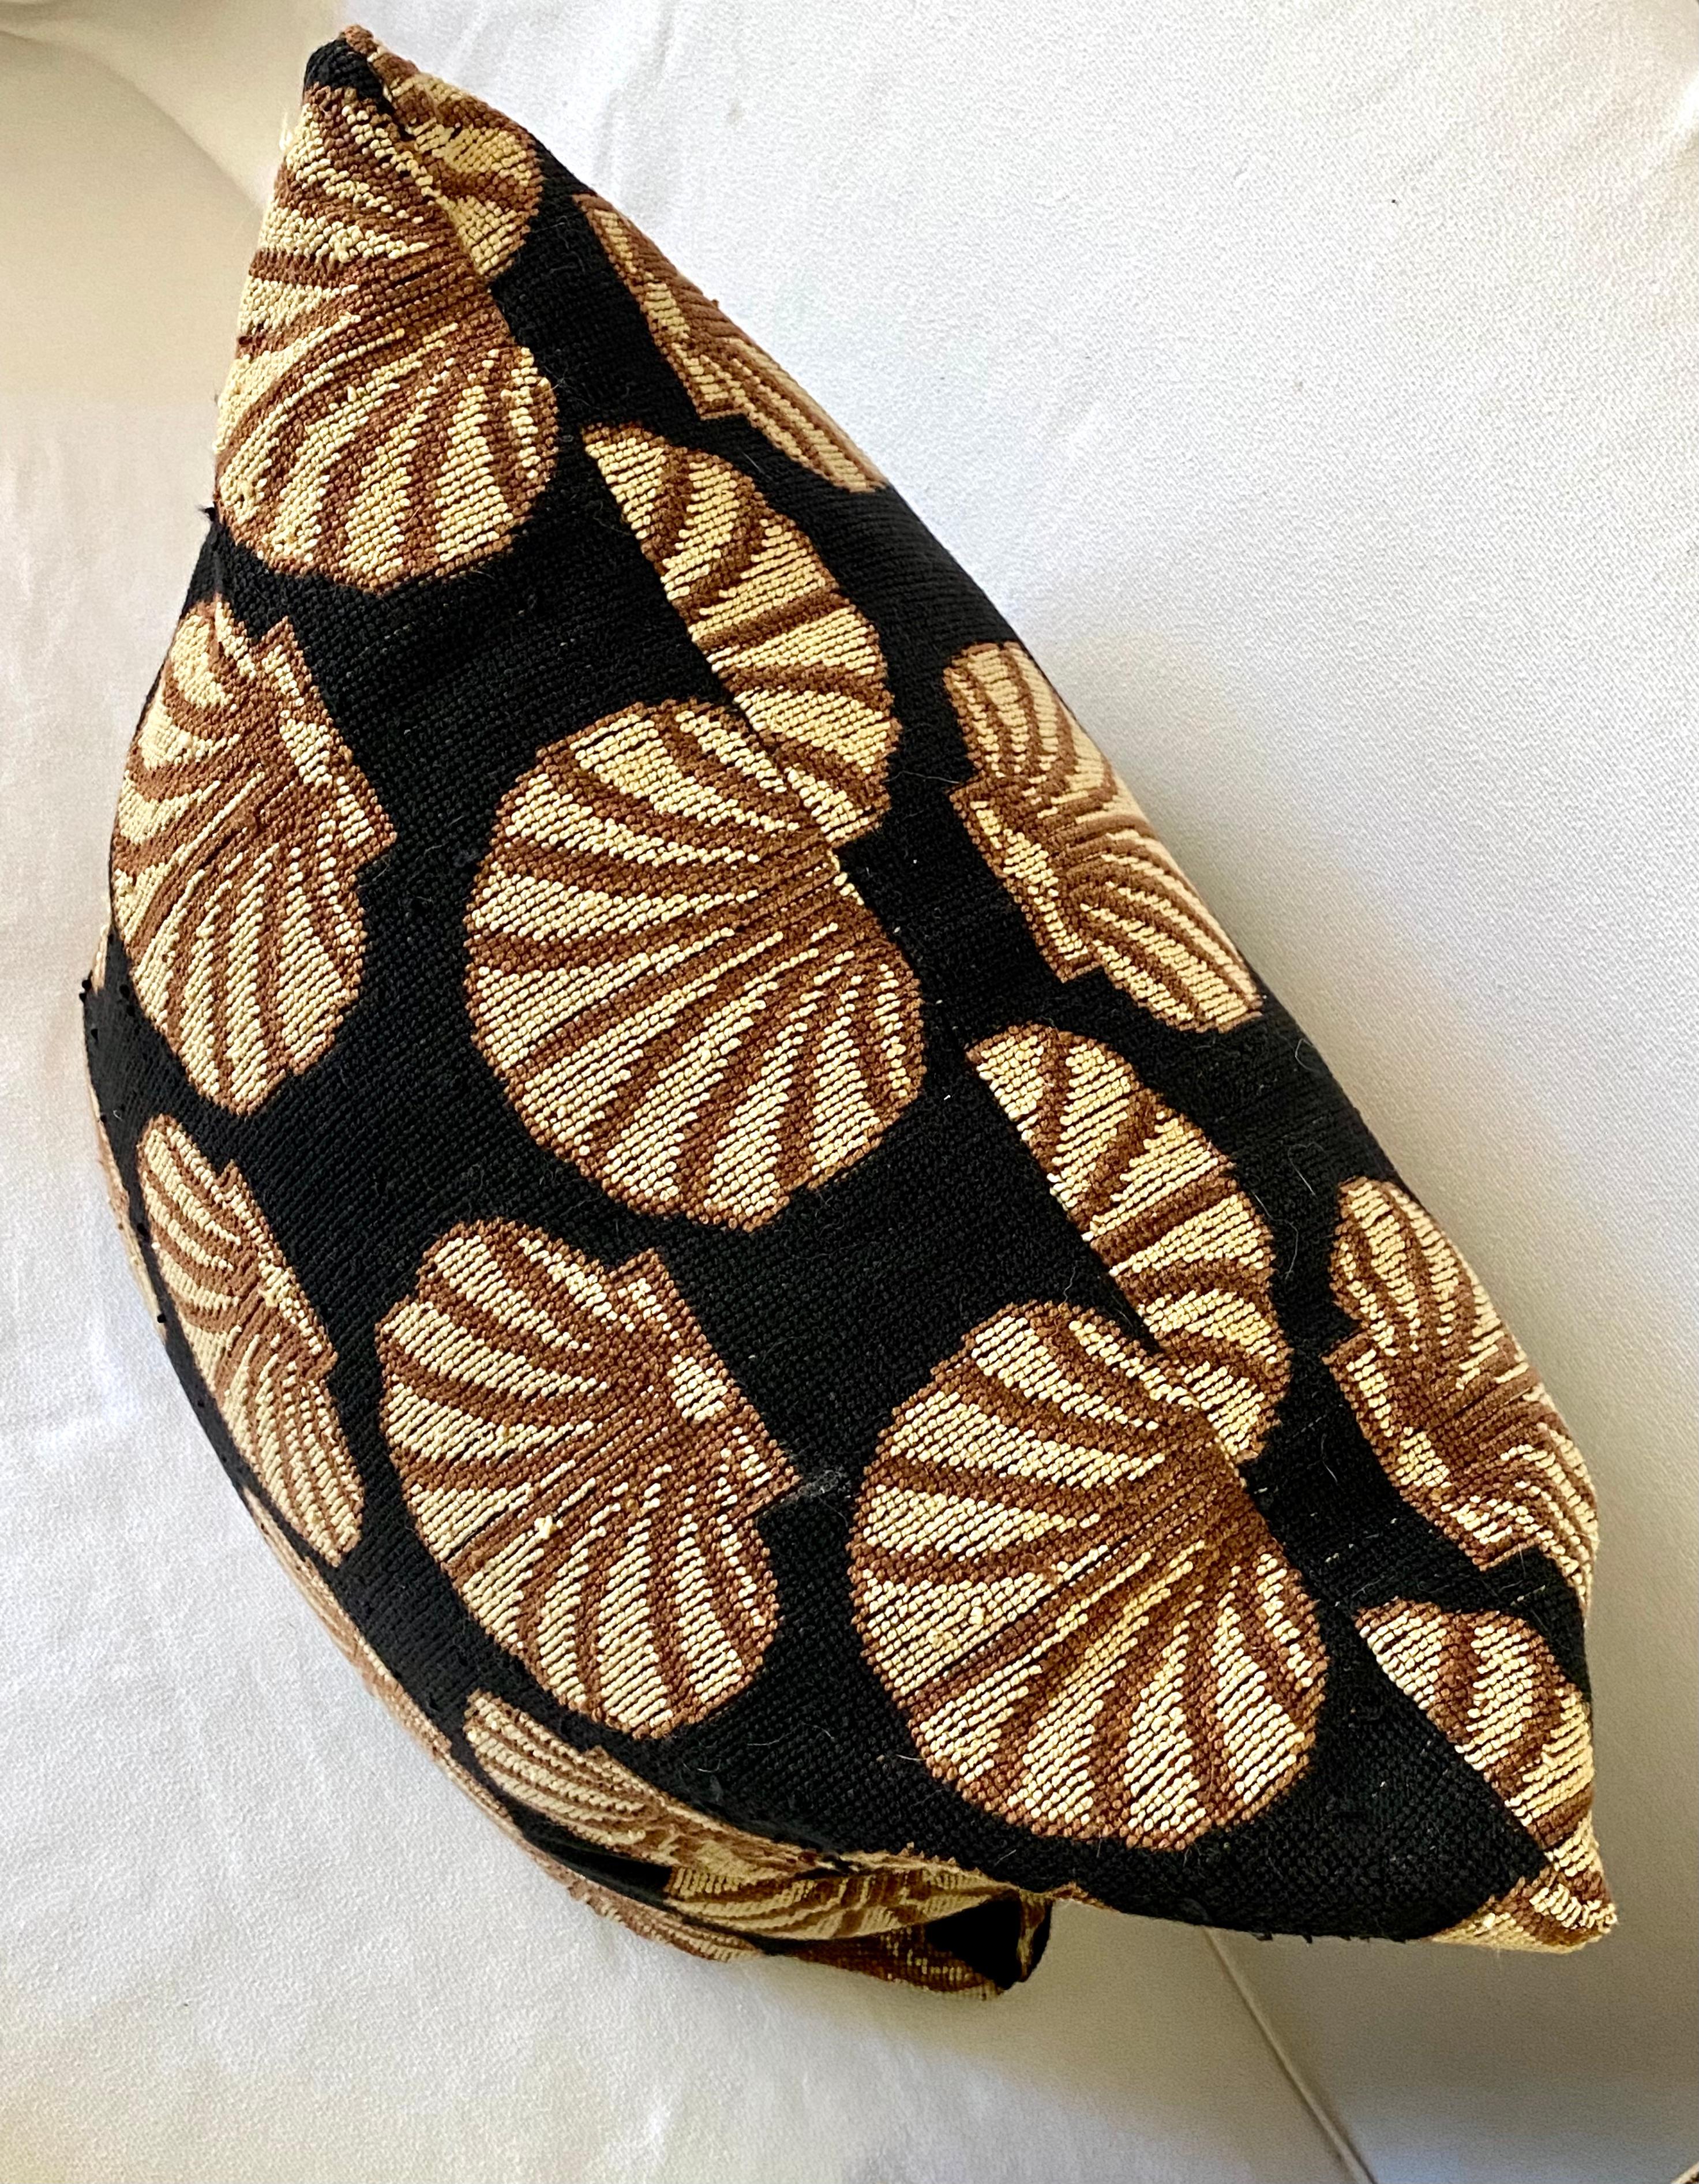 Contemporary Modern Gros Point Pair of Pillows, in Black with Tan Sea Shell Motive For Sale